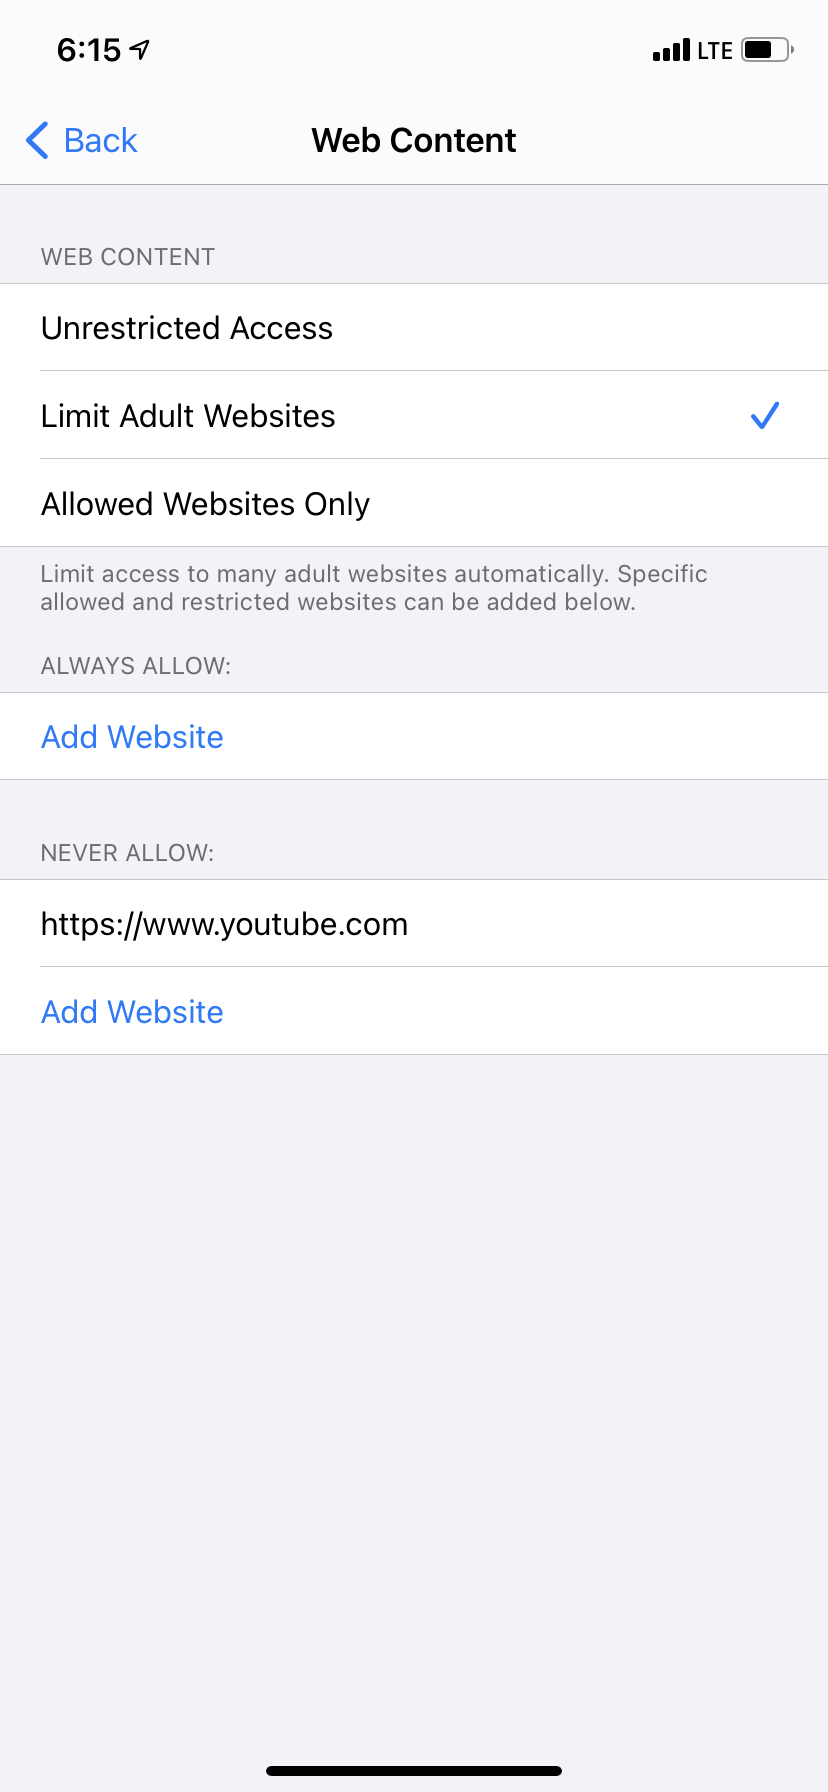 Choose to Limit Adult Websites and add YouTube's URL to the block list